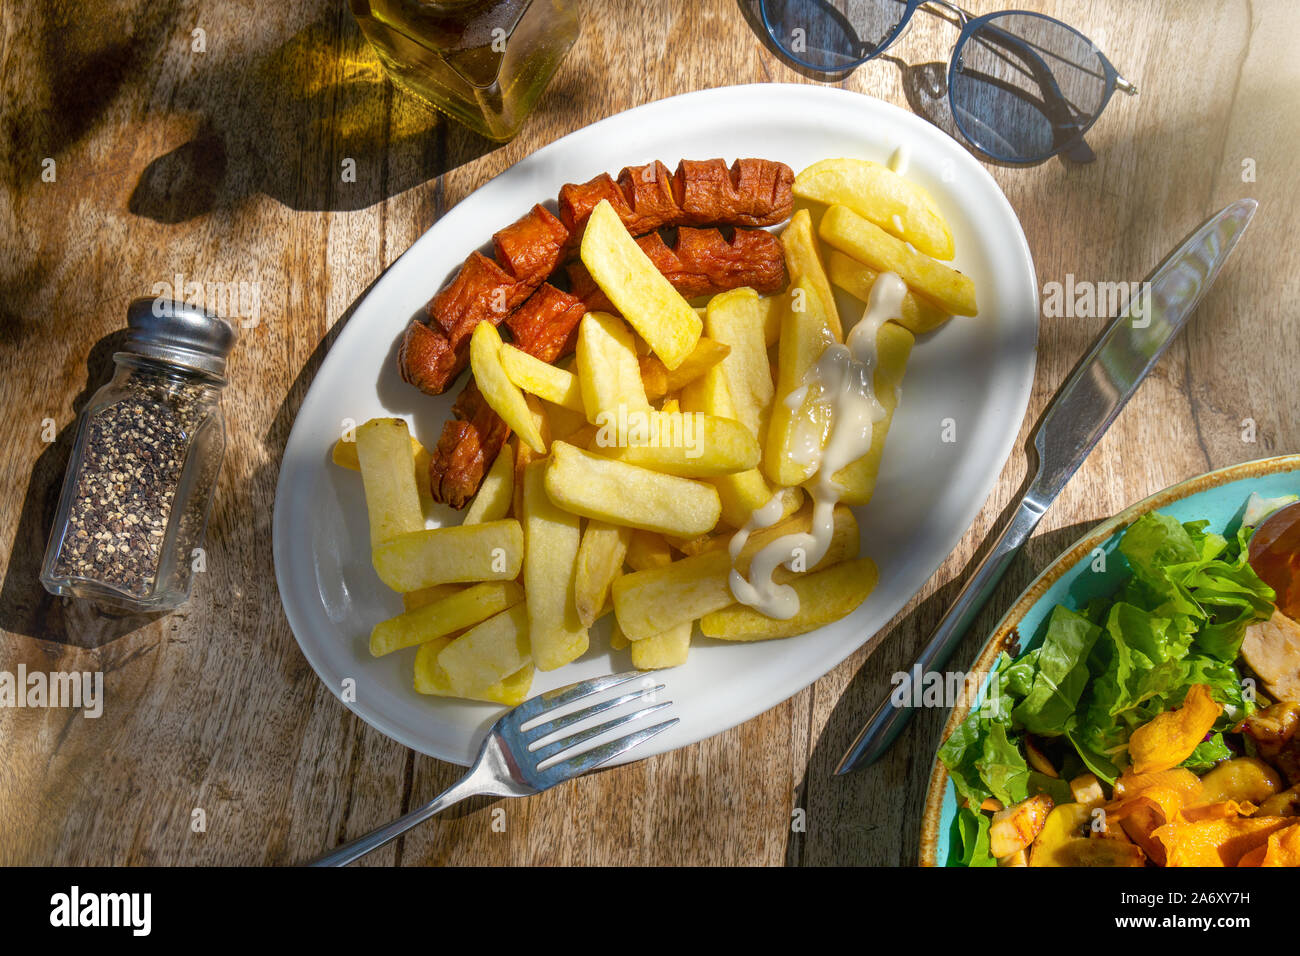 fast food in an outdoor cafe on a wooden table Stock Photo